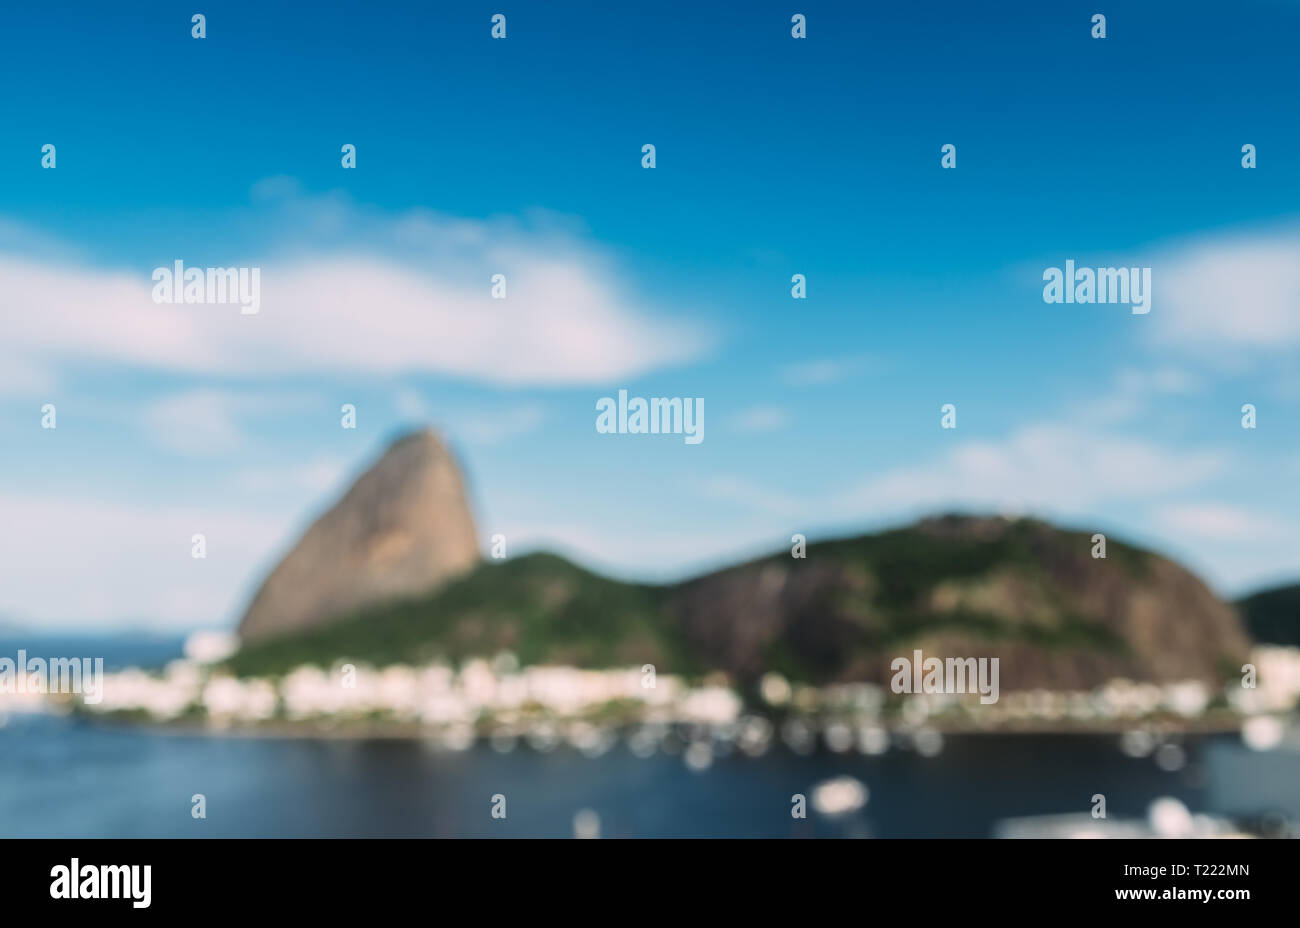 Deliberately defocused abstract view of Sugarloaf Mountain and Rio de Janeiro Brazil skyline reflecting on Botafogo Bay. Stock Photo